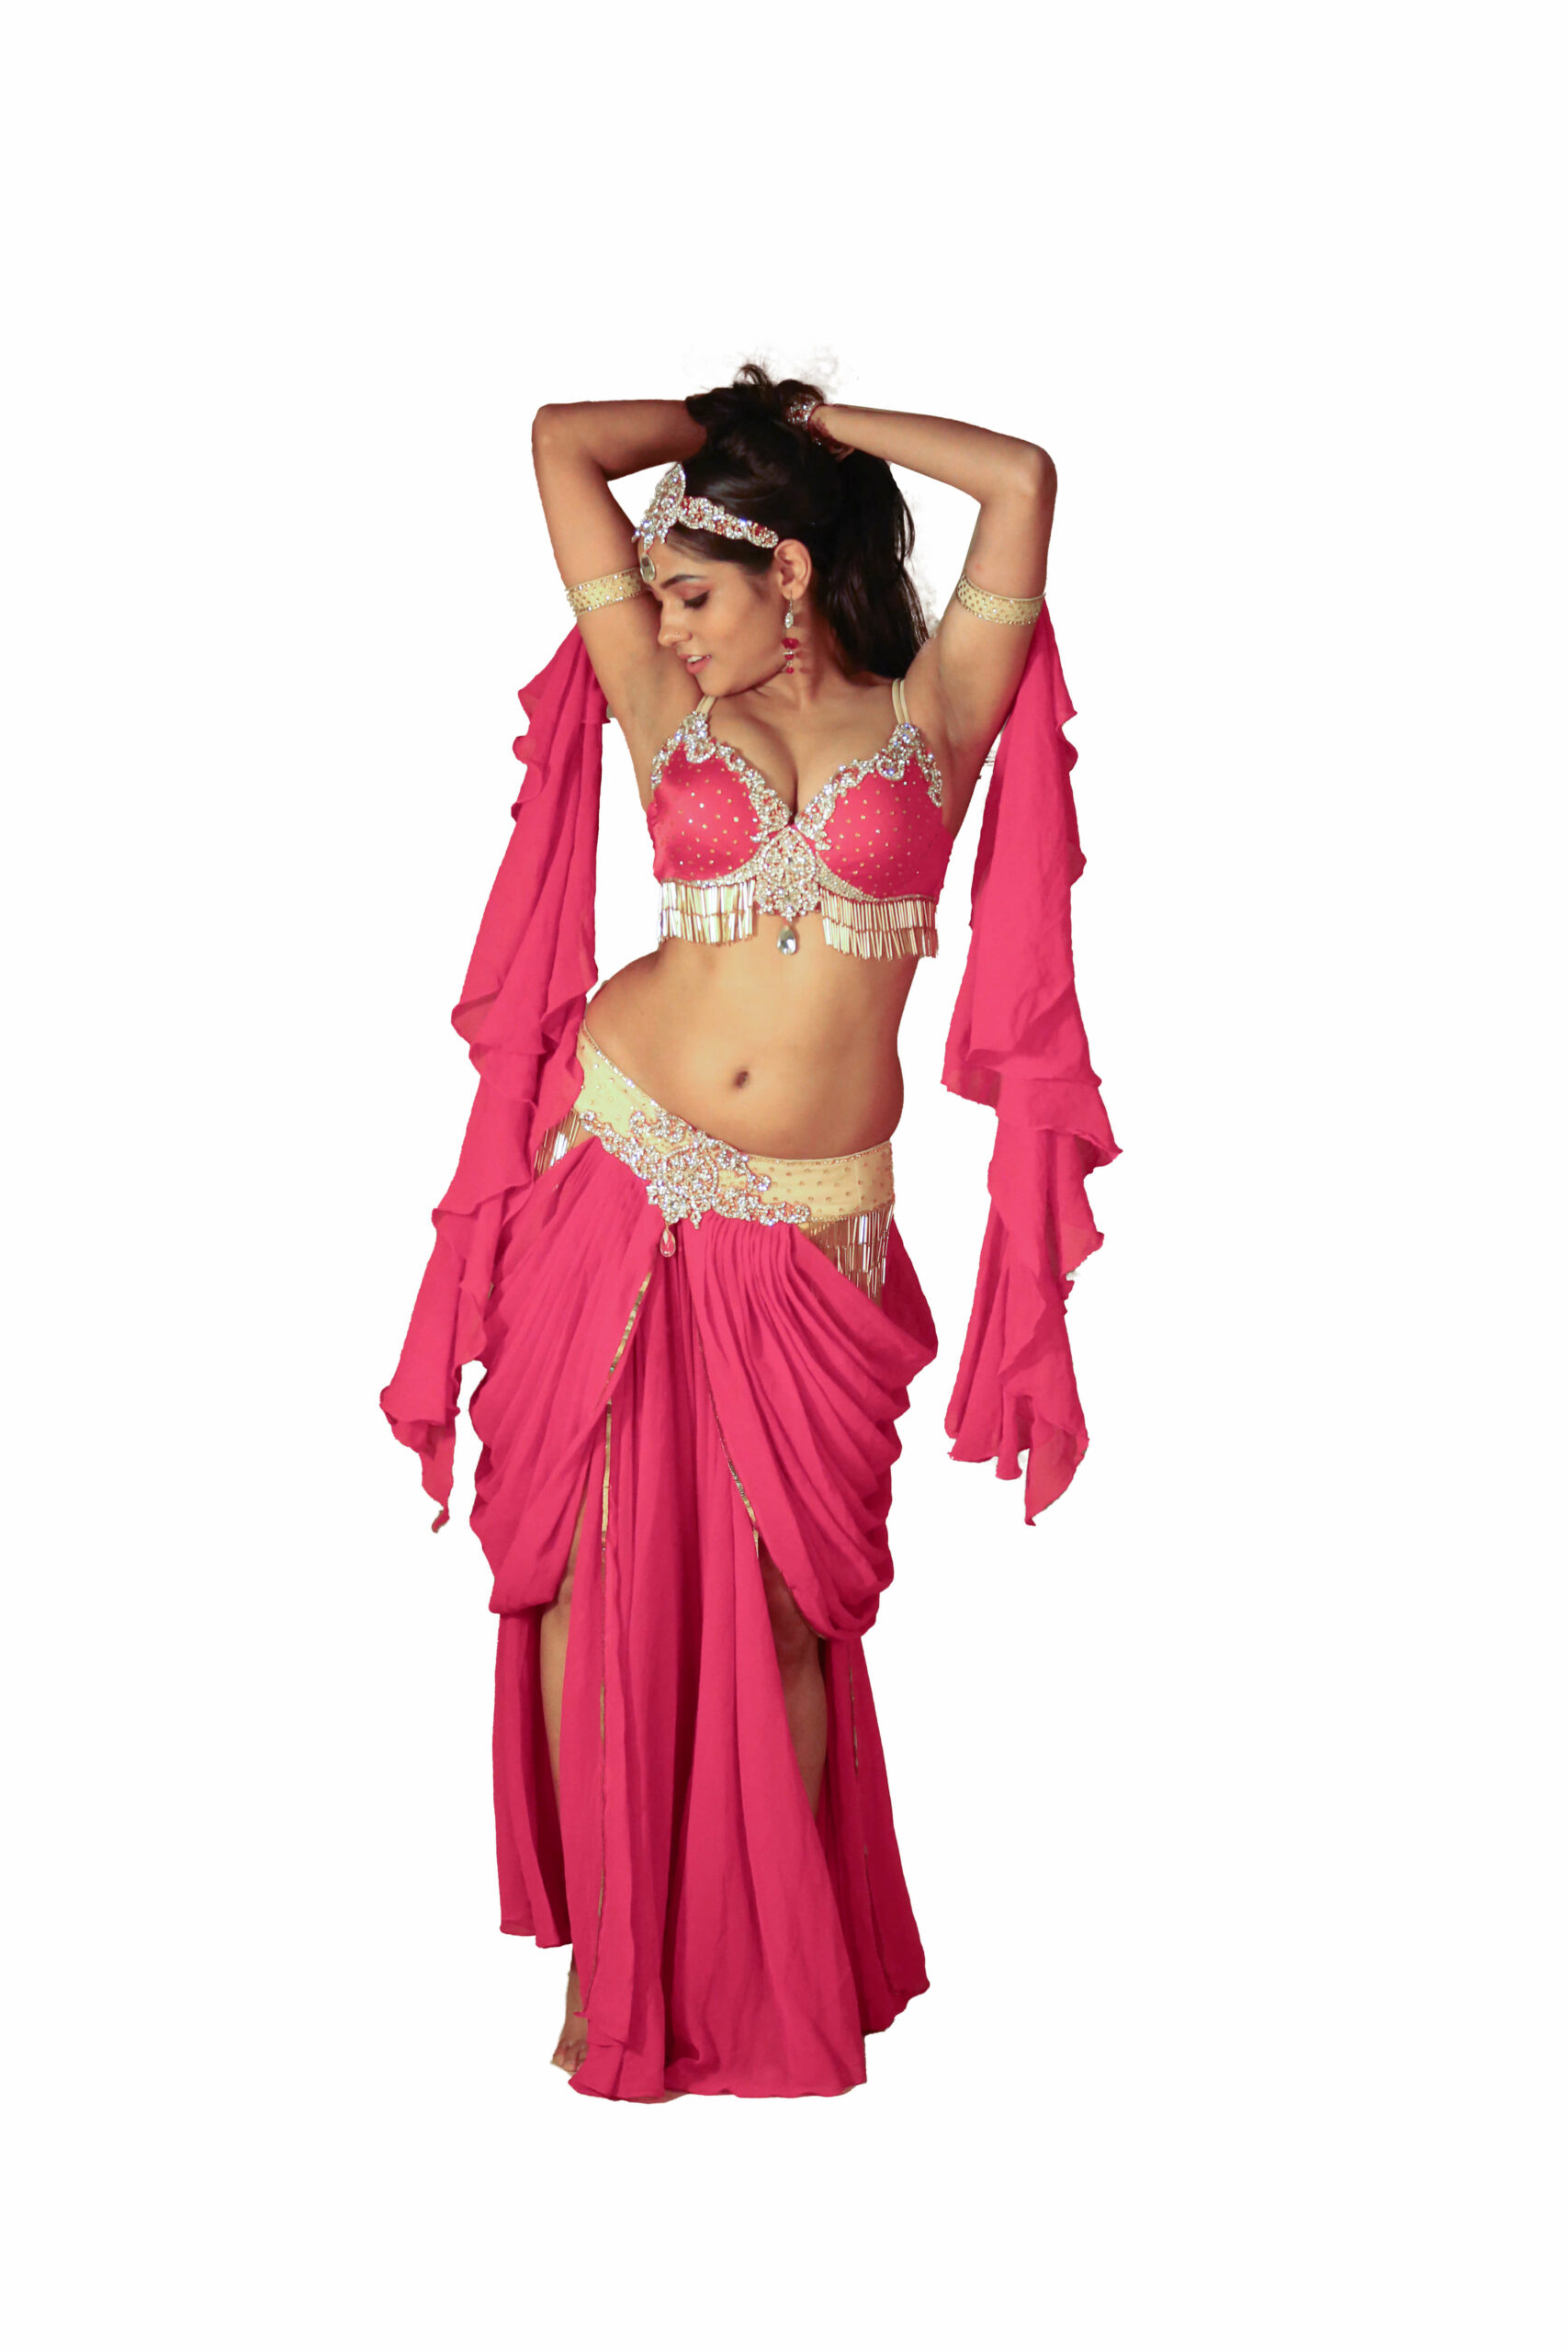 belly dance costumes – BELLY DANCING